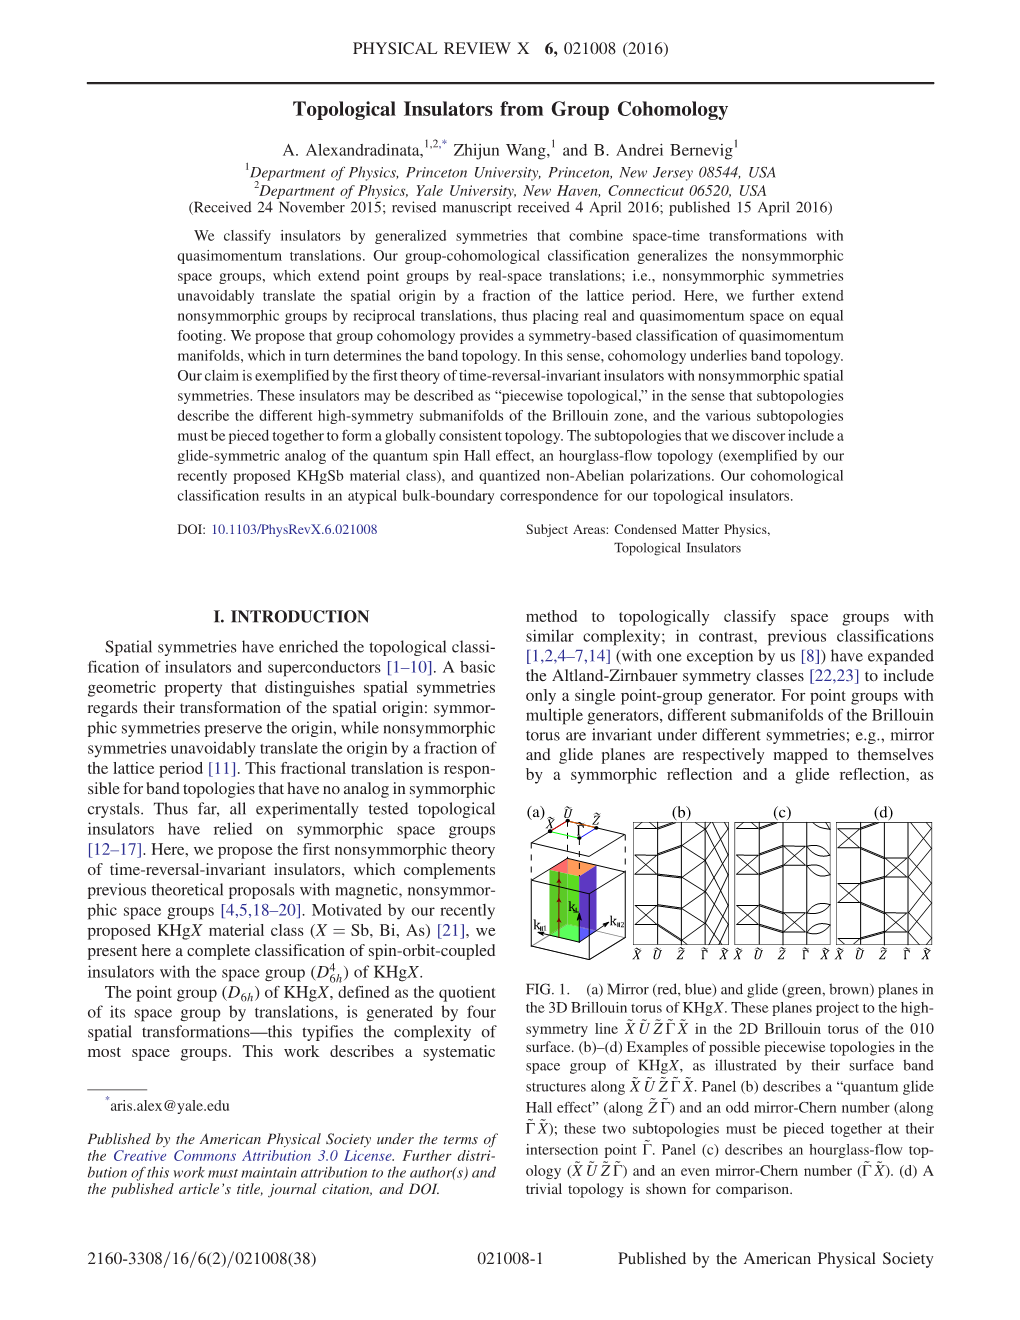 Topological Insulators from Group Cohomology